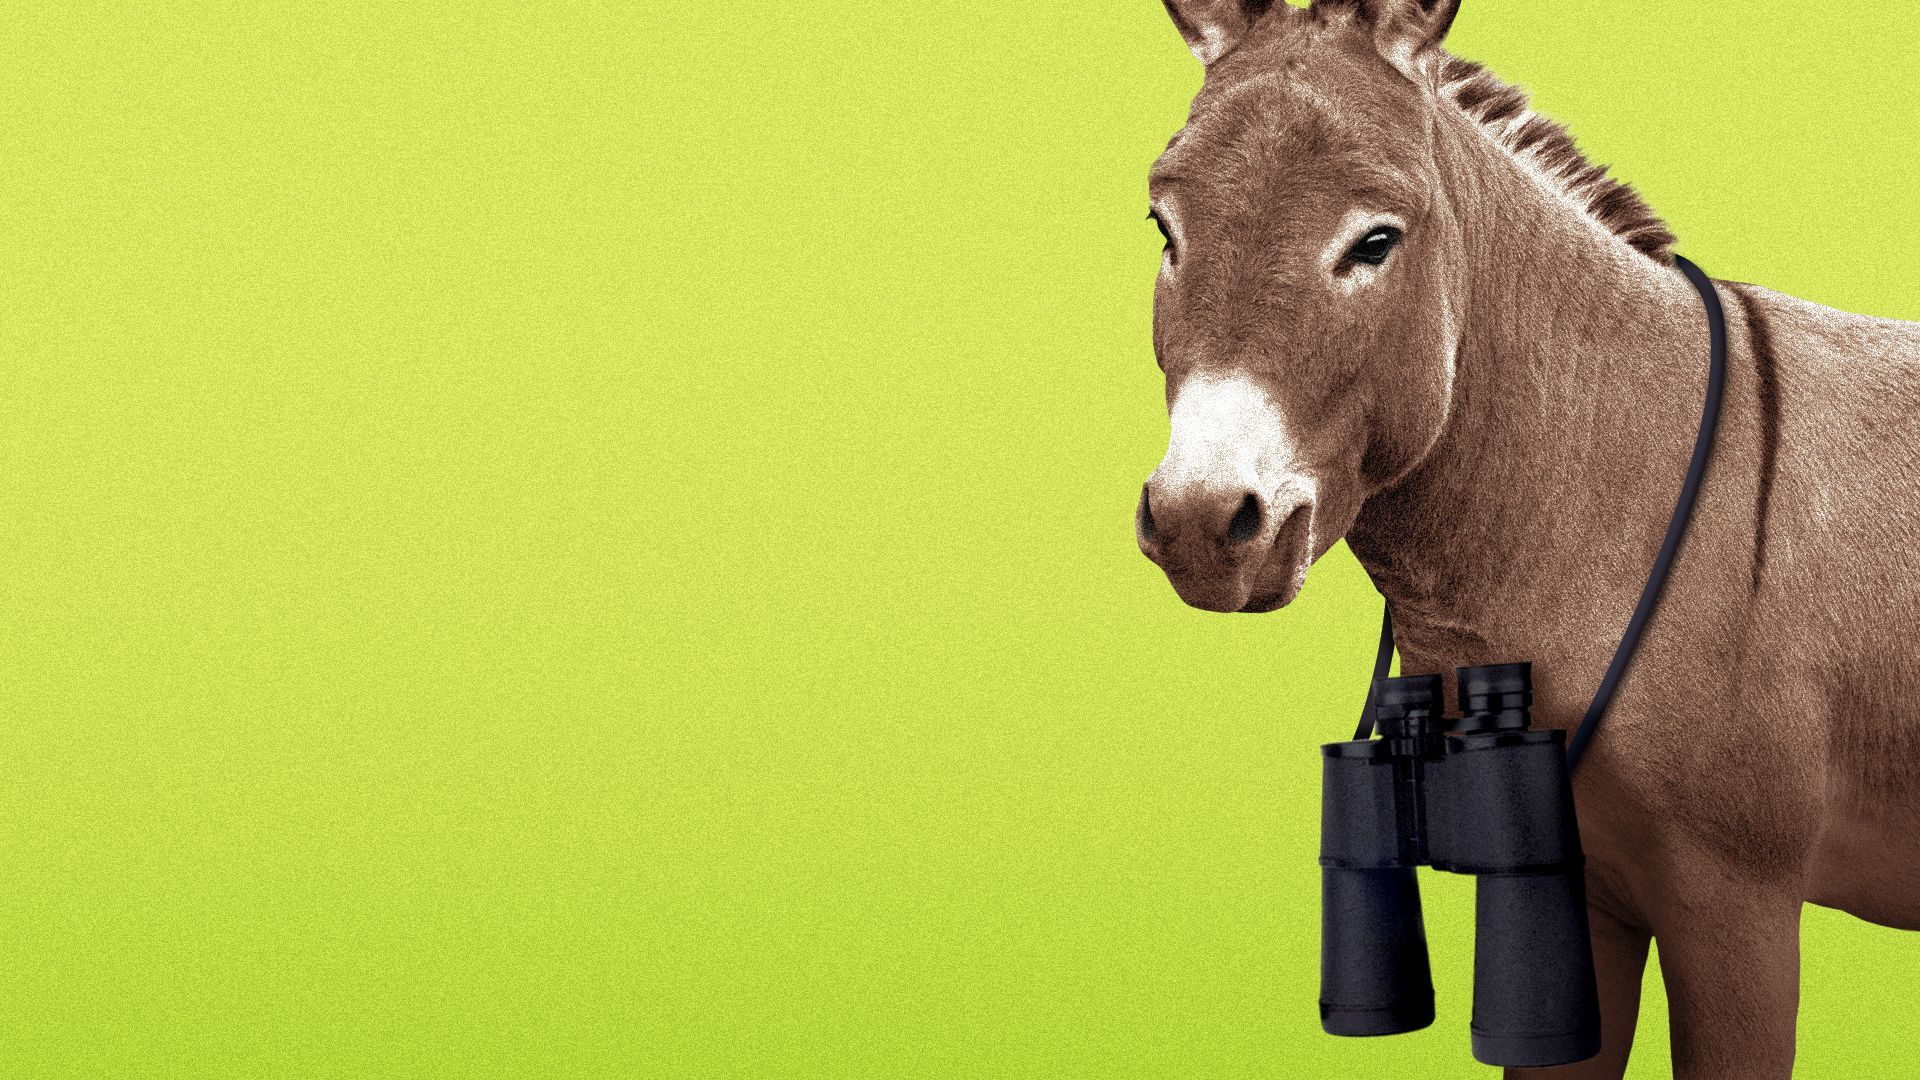 Illustration of a donkey wearing a pair of binoculars around its neck.